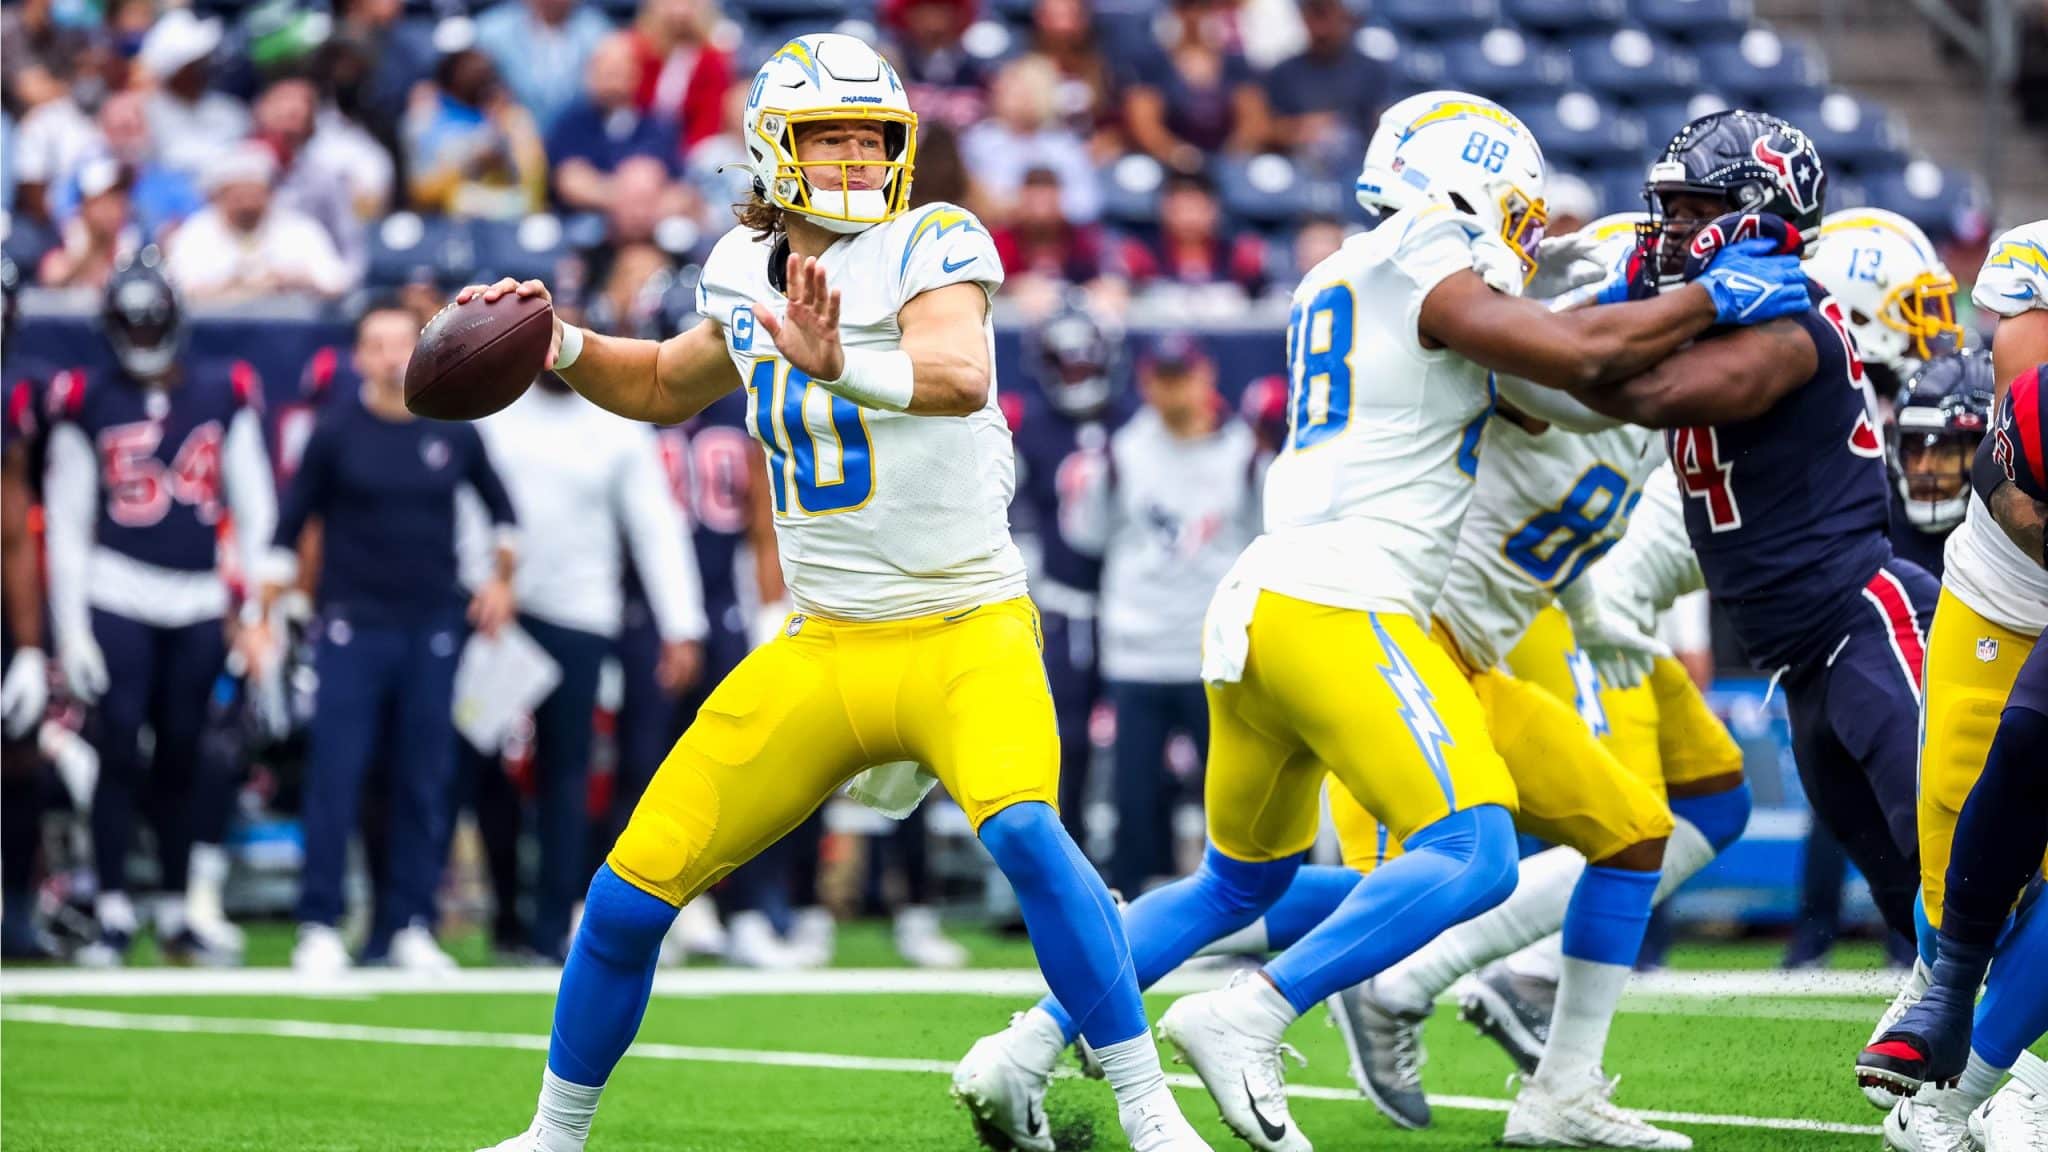 Chargers Suffer Crushing Loss To Texans: By The UGLY Numbers